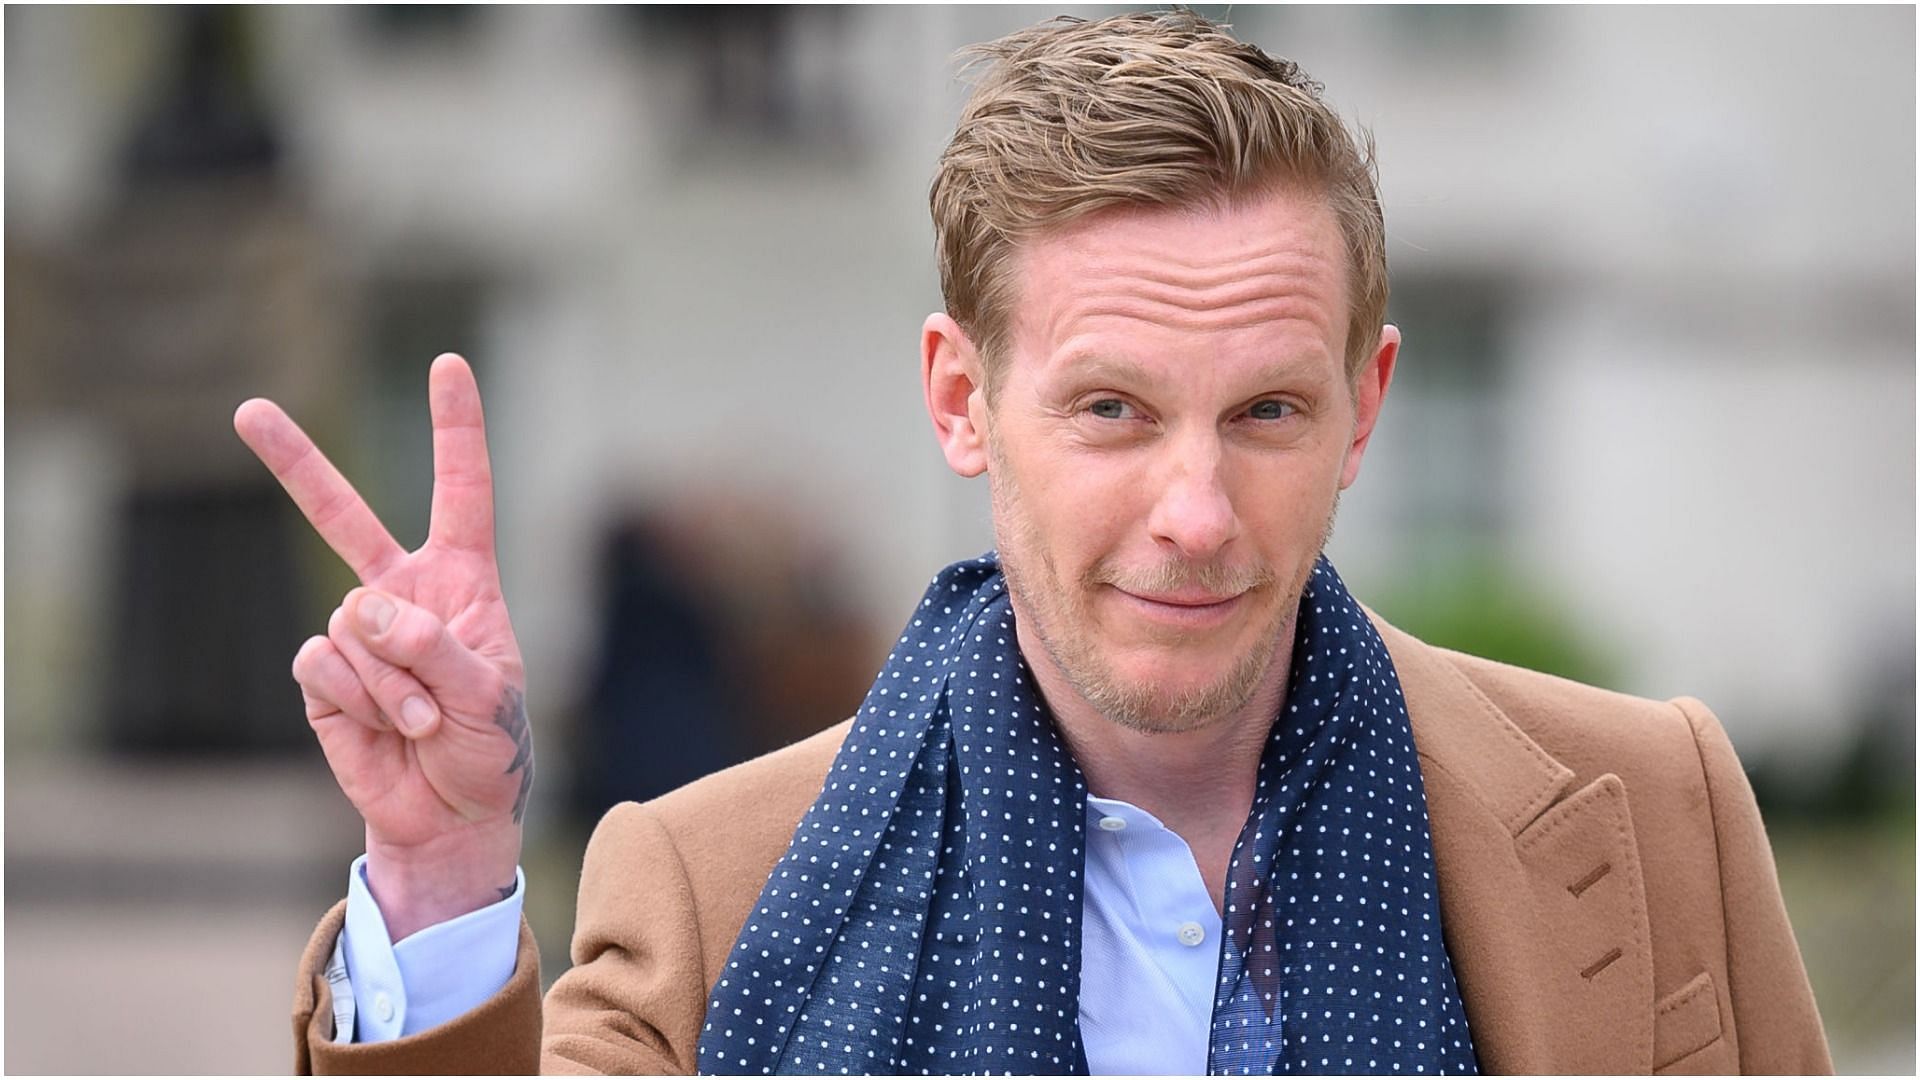 Laurence Fox has been tested positive for Covid-19 (Image via Leon Neal/Getty Images)